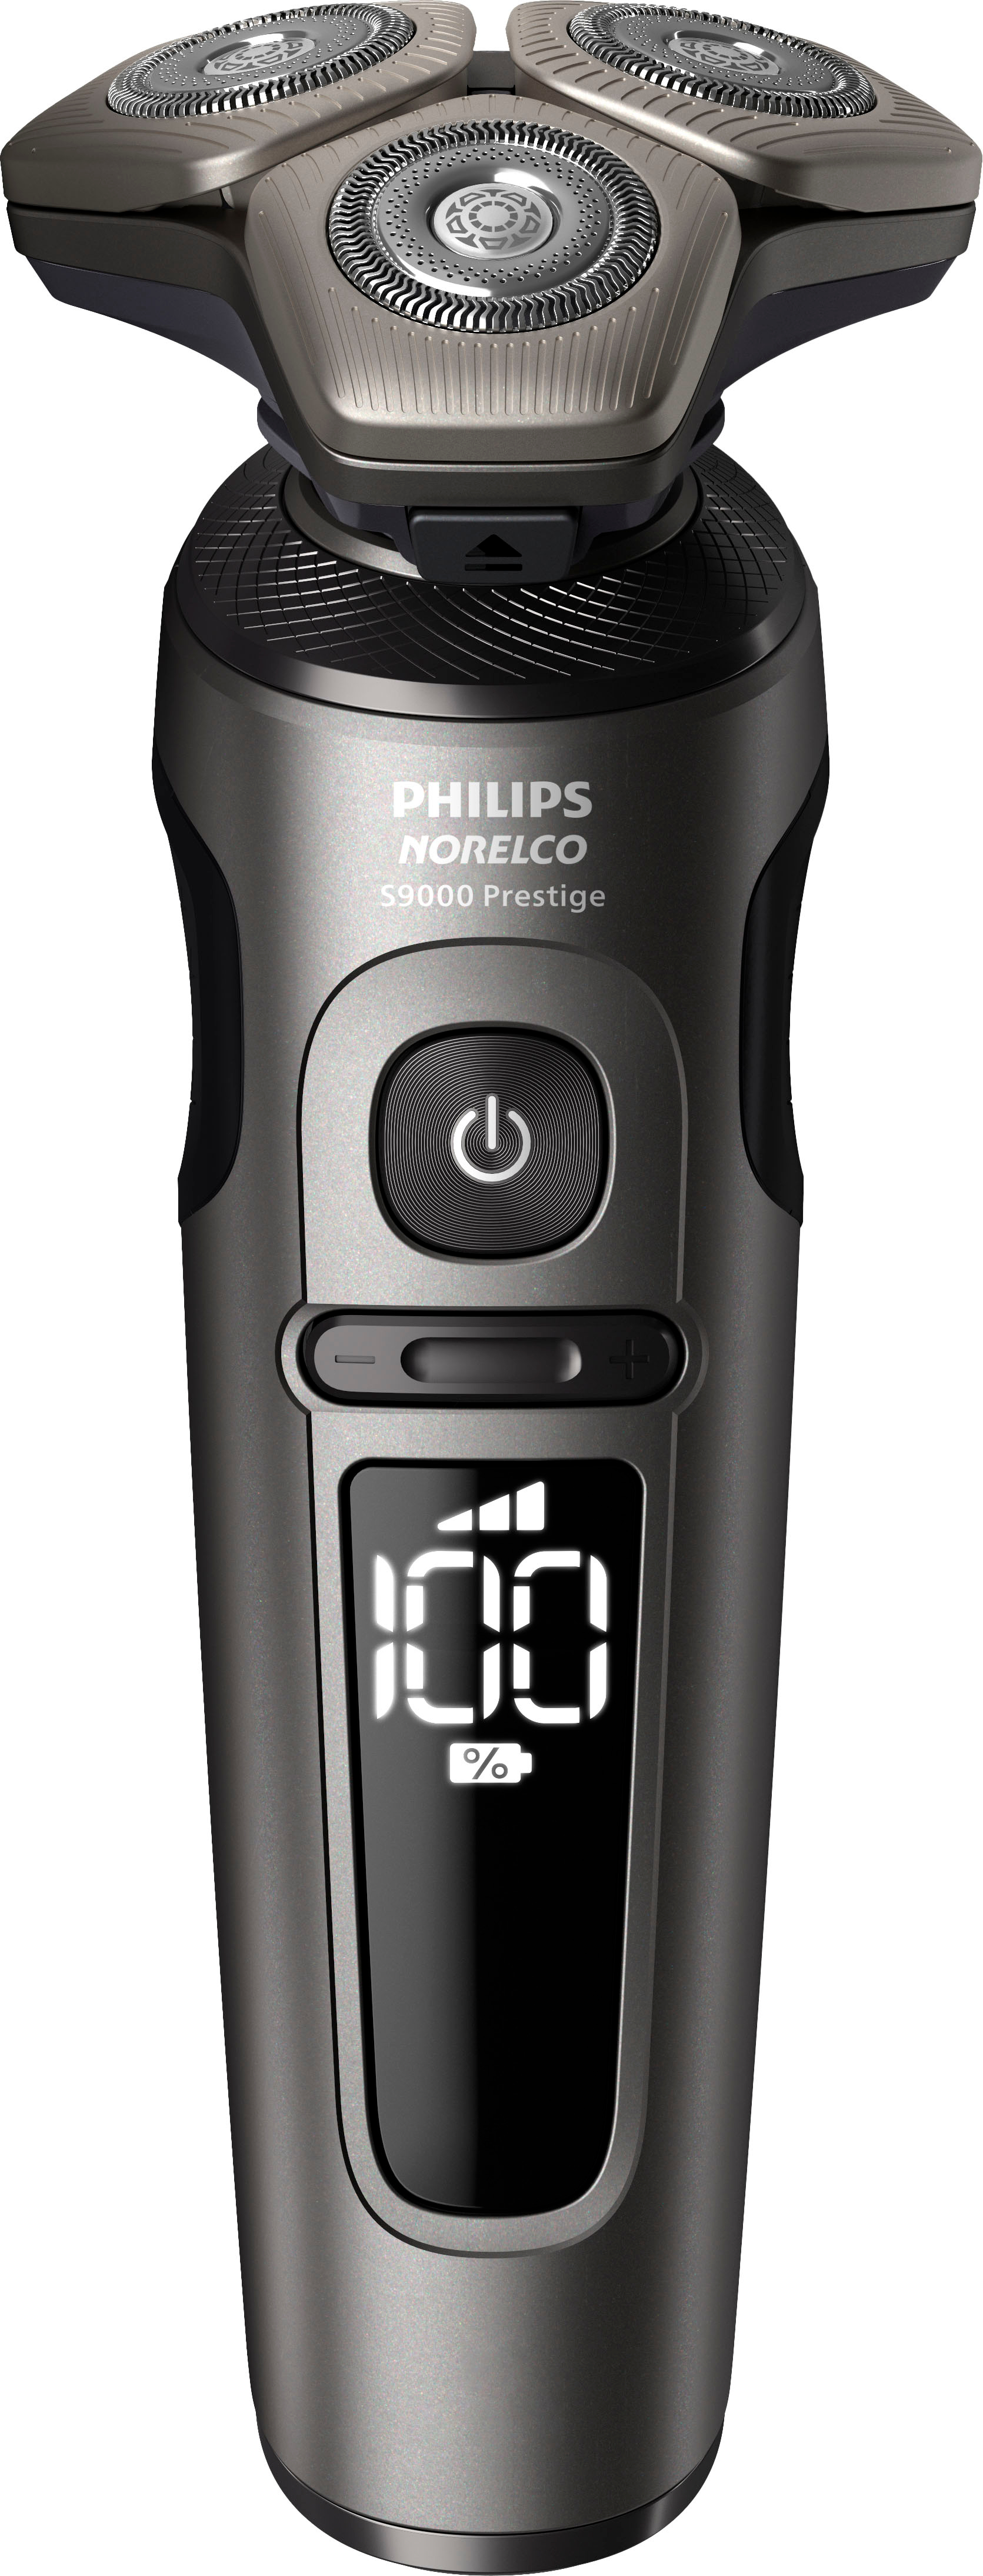 SP9872/86 Pad - Buy Qi SP9872/86 with Best Black Philips Shaver 9000 Prestige Charging Norelco